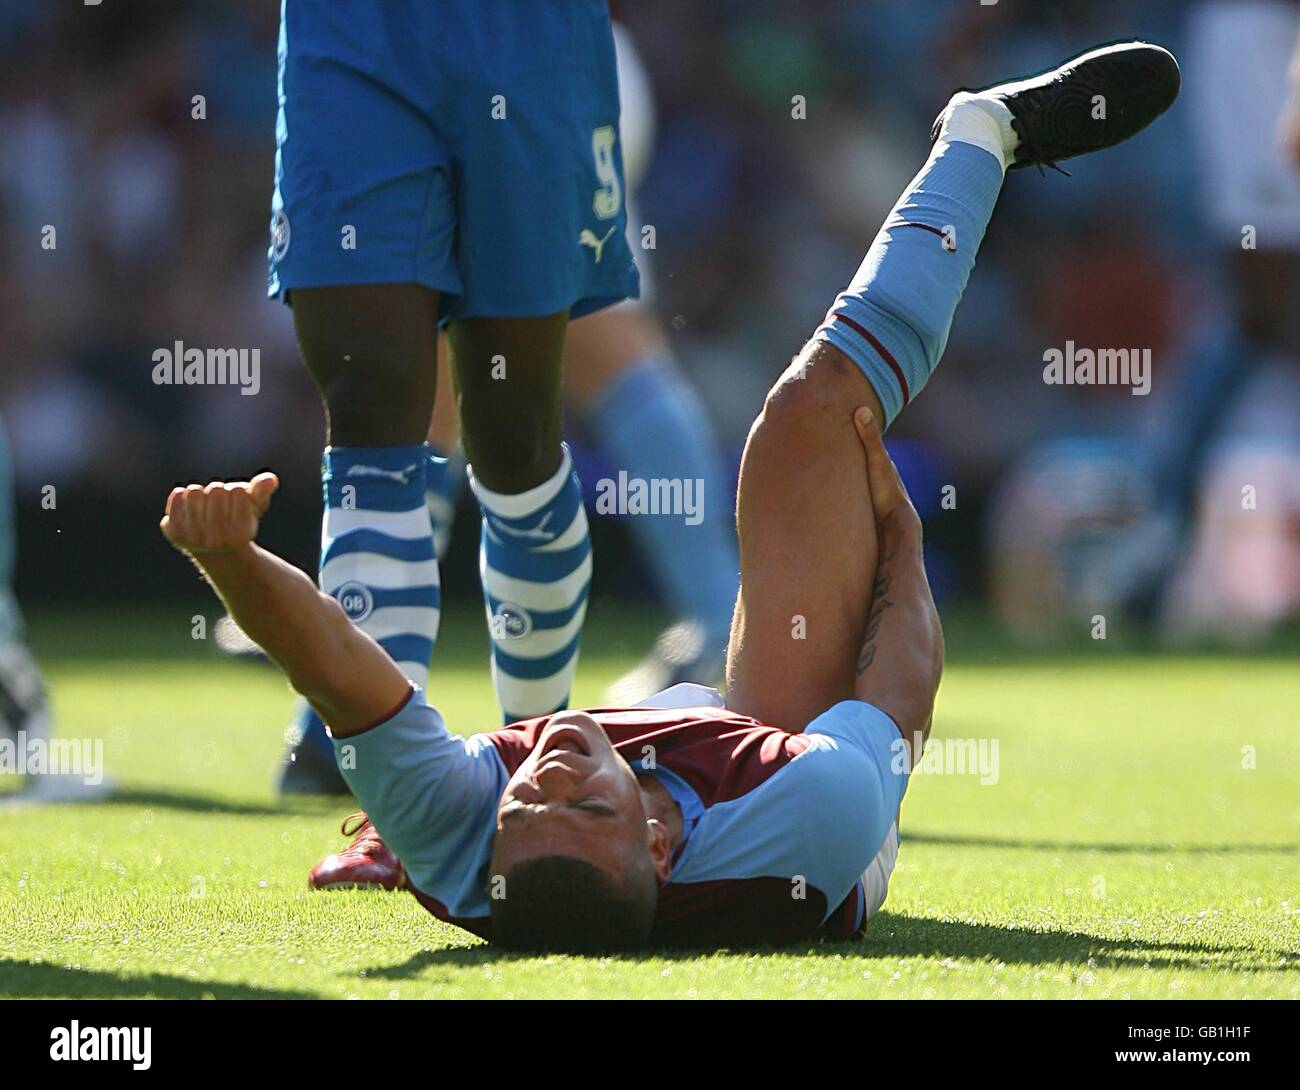 Soccer - UEFA Intertoto Cup - Third Round - Second Leg - Aston Villa v Odense Boldklub - Villa Park. Aston Villa's Wilfred Bouma (on floor) clutches his leg after dislocating his ankle after a collision with Odense BK's Djilby Fall Stock Photo